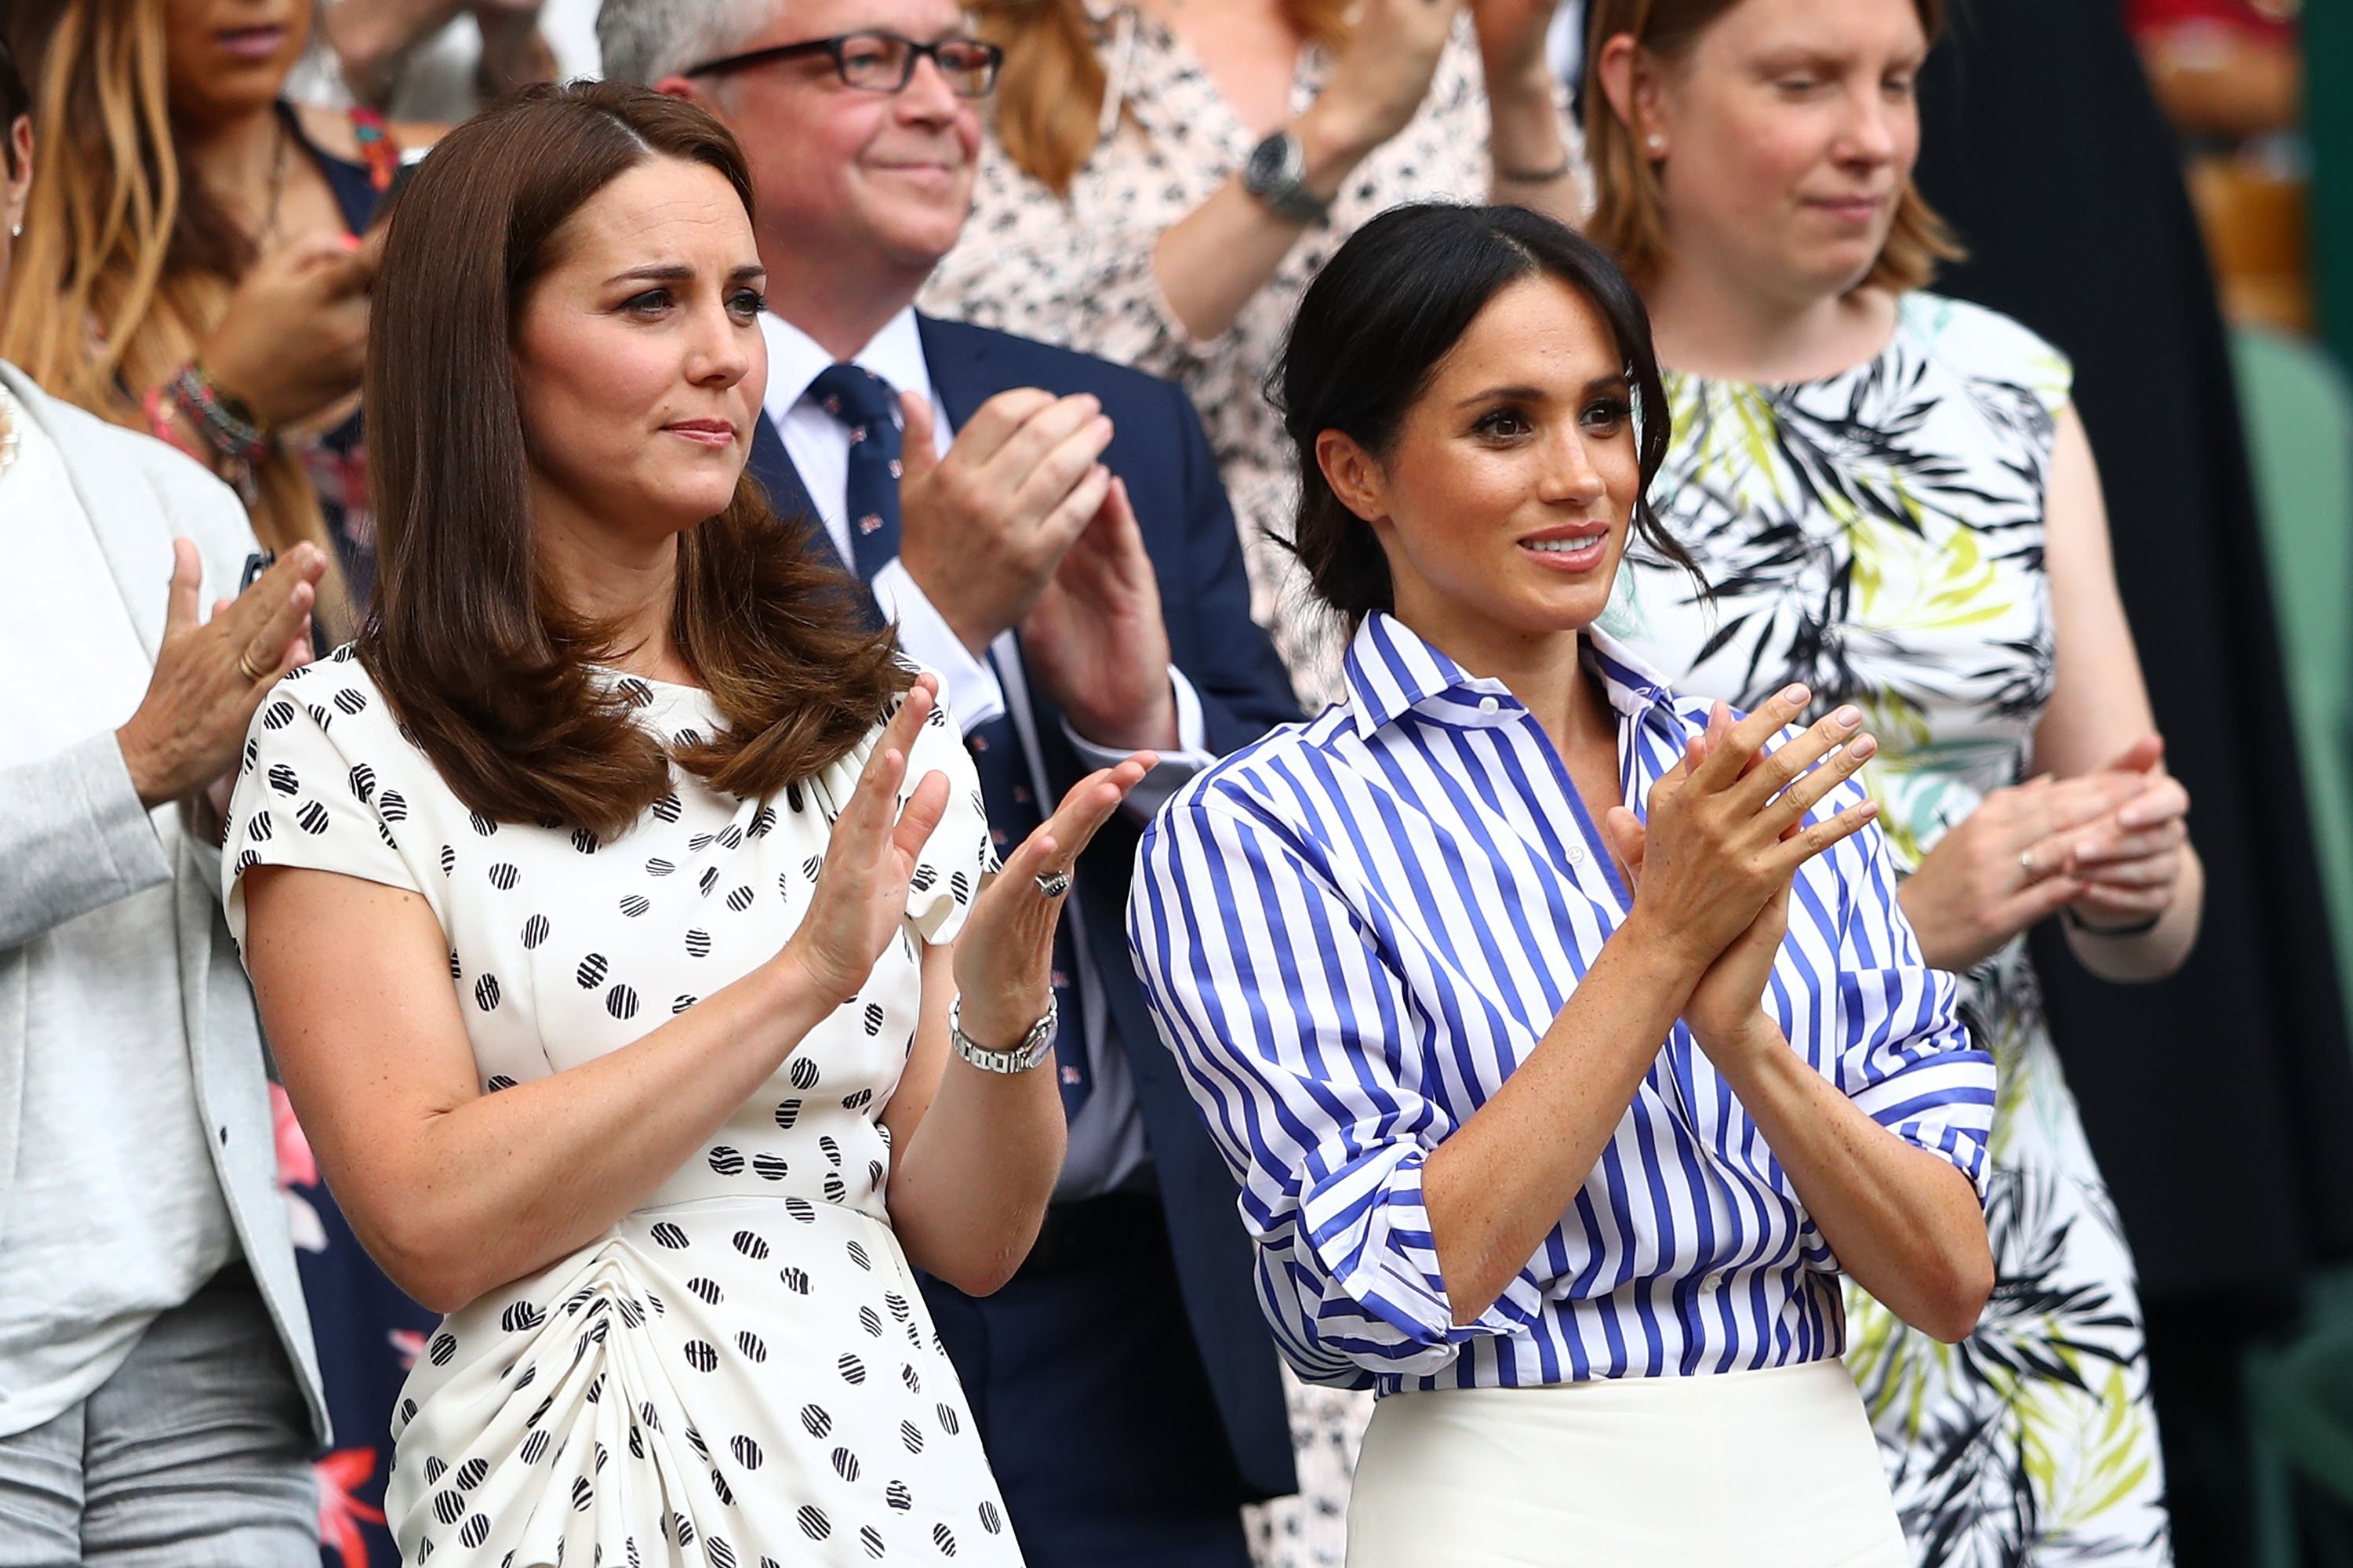 Kate Middleton and Meghan Markle applaud ahead of the Ladies' Singles final match on day twelve of the Wimbledon Lawn Tennis Championships at All England Lawn Tennis and Croquet Club on July 14, 2018 in London, England | Photo: Getty Images